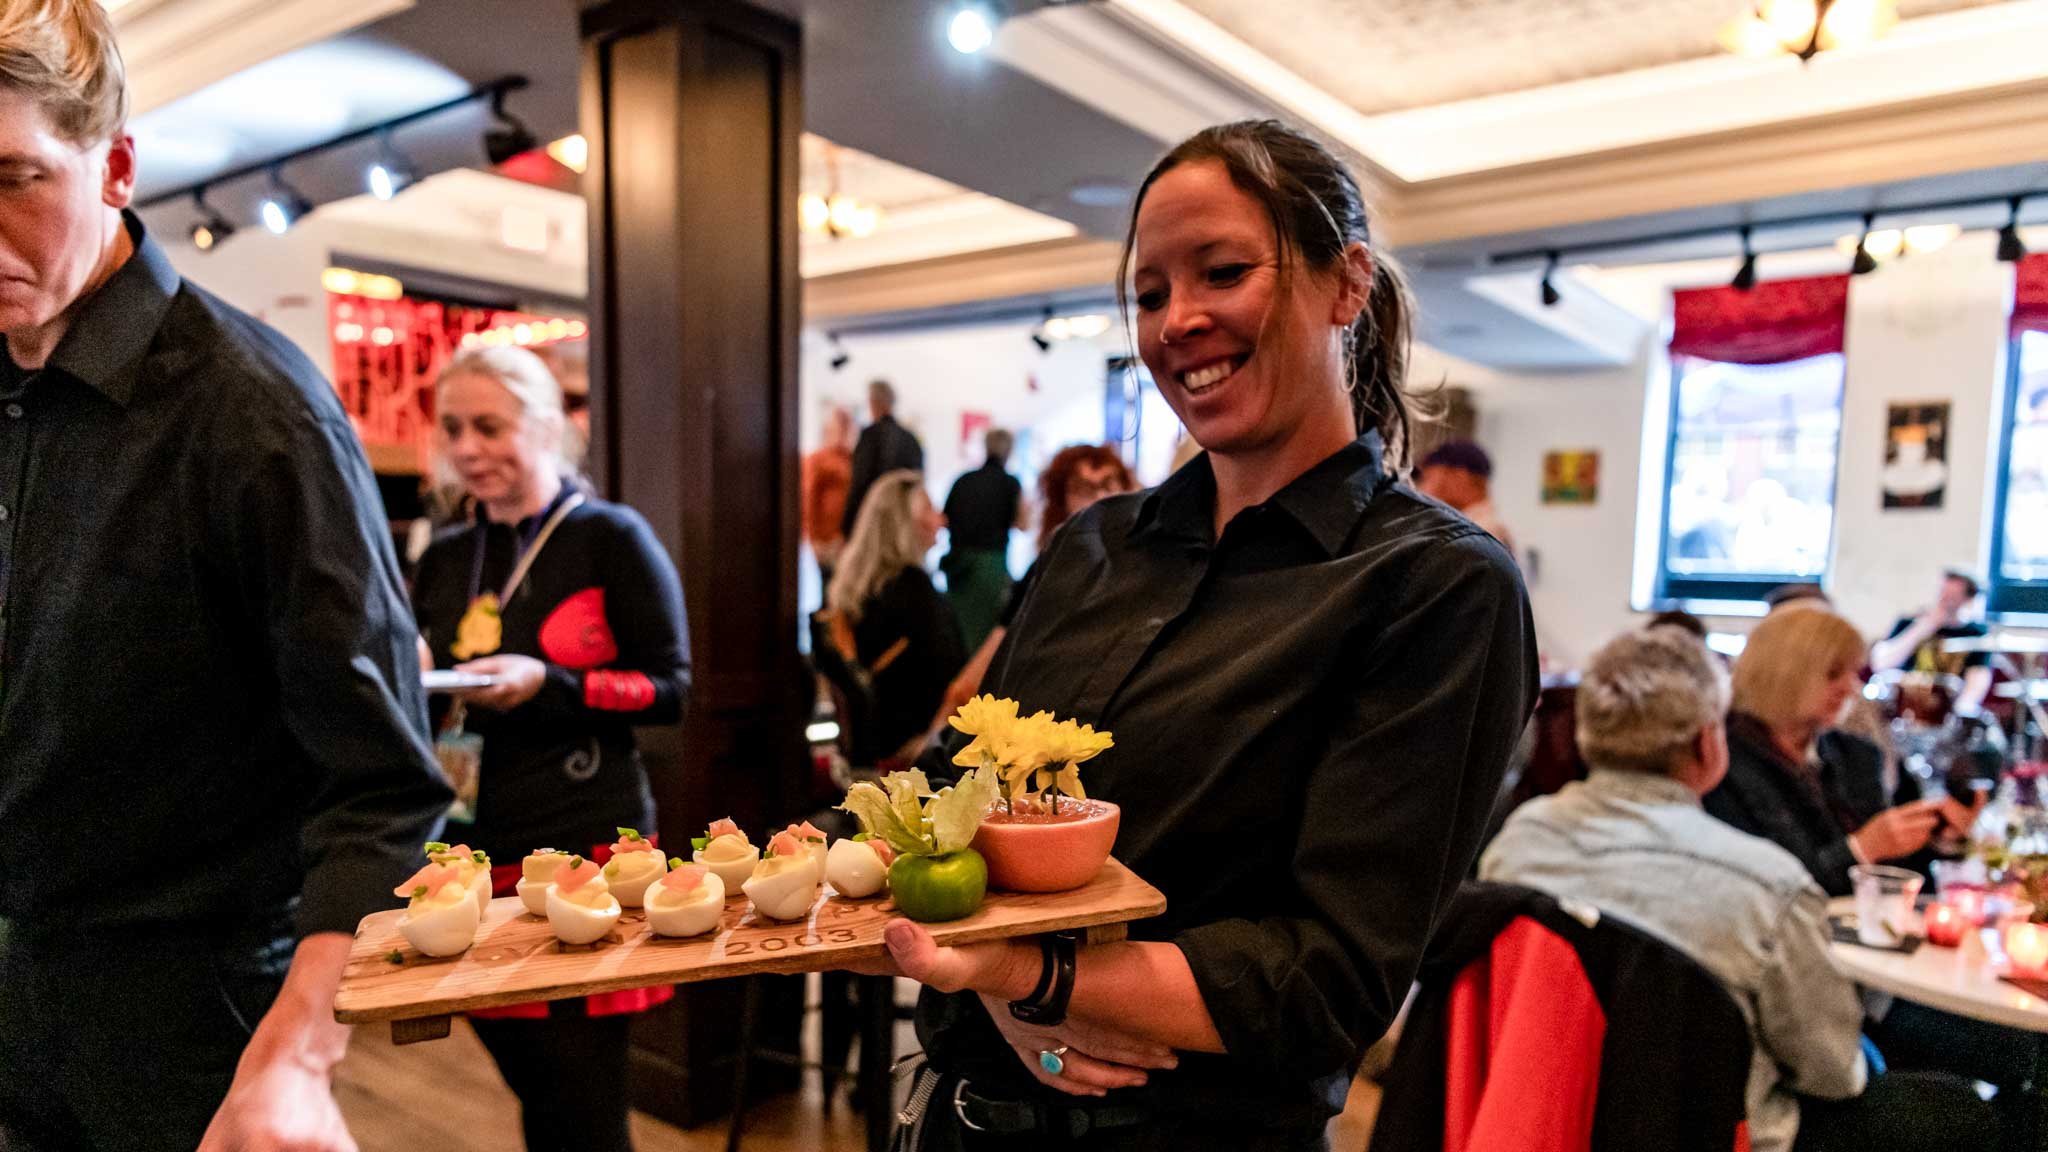   Patron pass-holders will be greeted to creative cuisine, sparkling libations and live music. The Patron Welcome Reception will take place at the iconic Sheridan SHOW Bar in the heart of downtown Telluride. Setting the tone for an elegant weekend, t